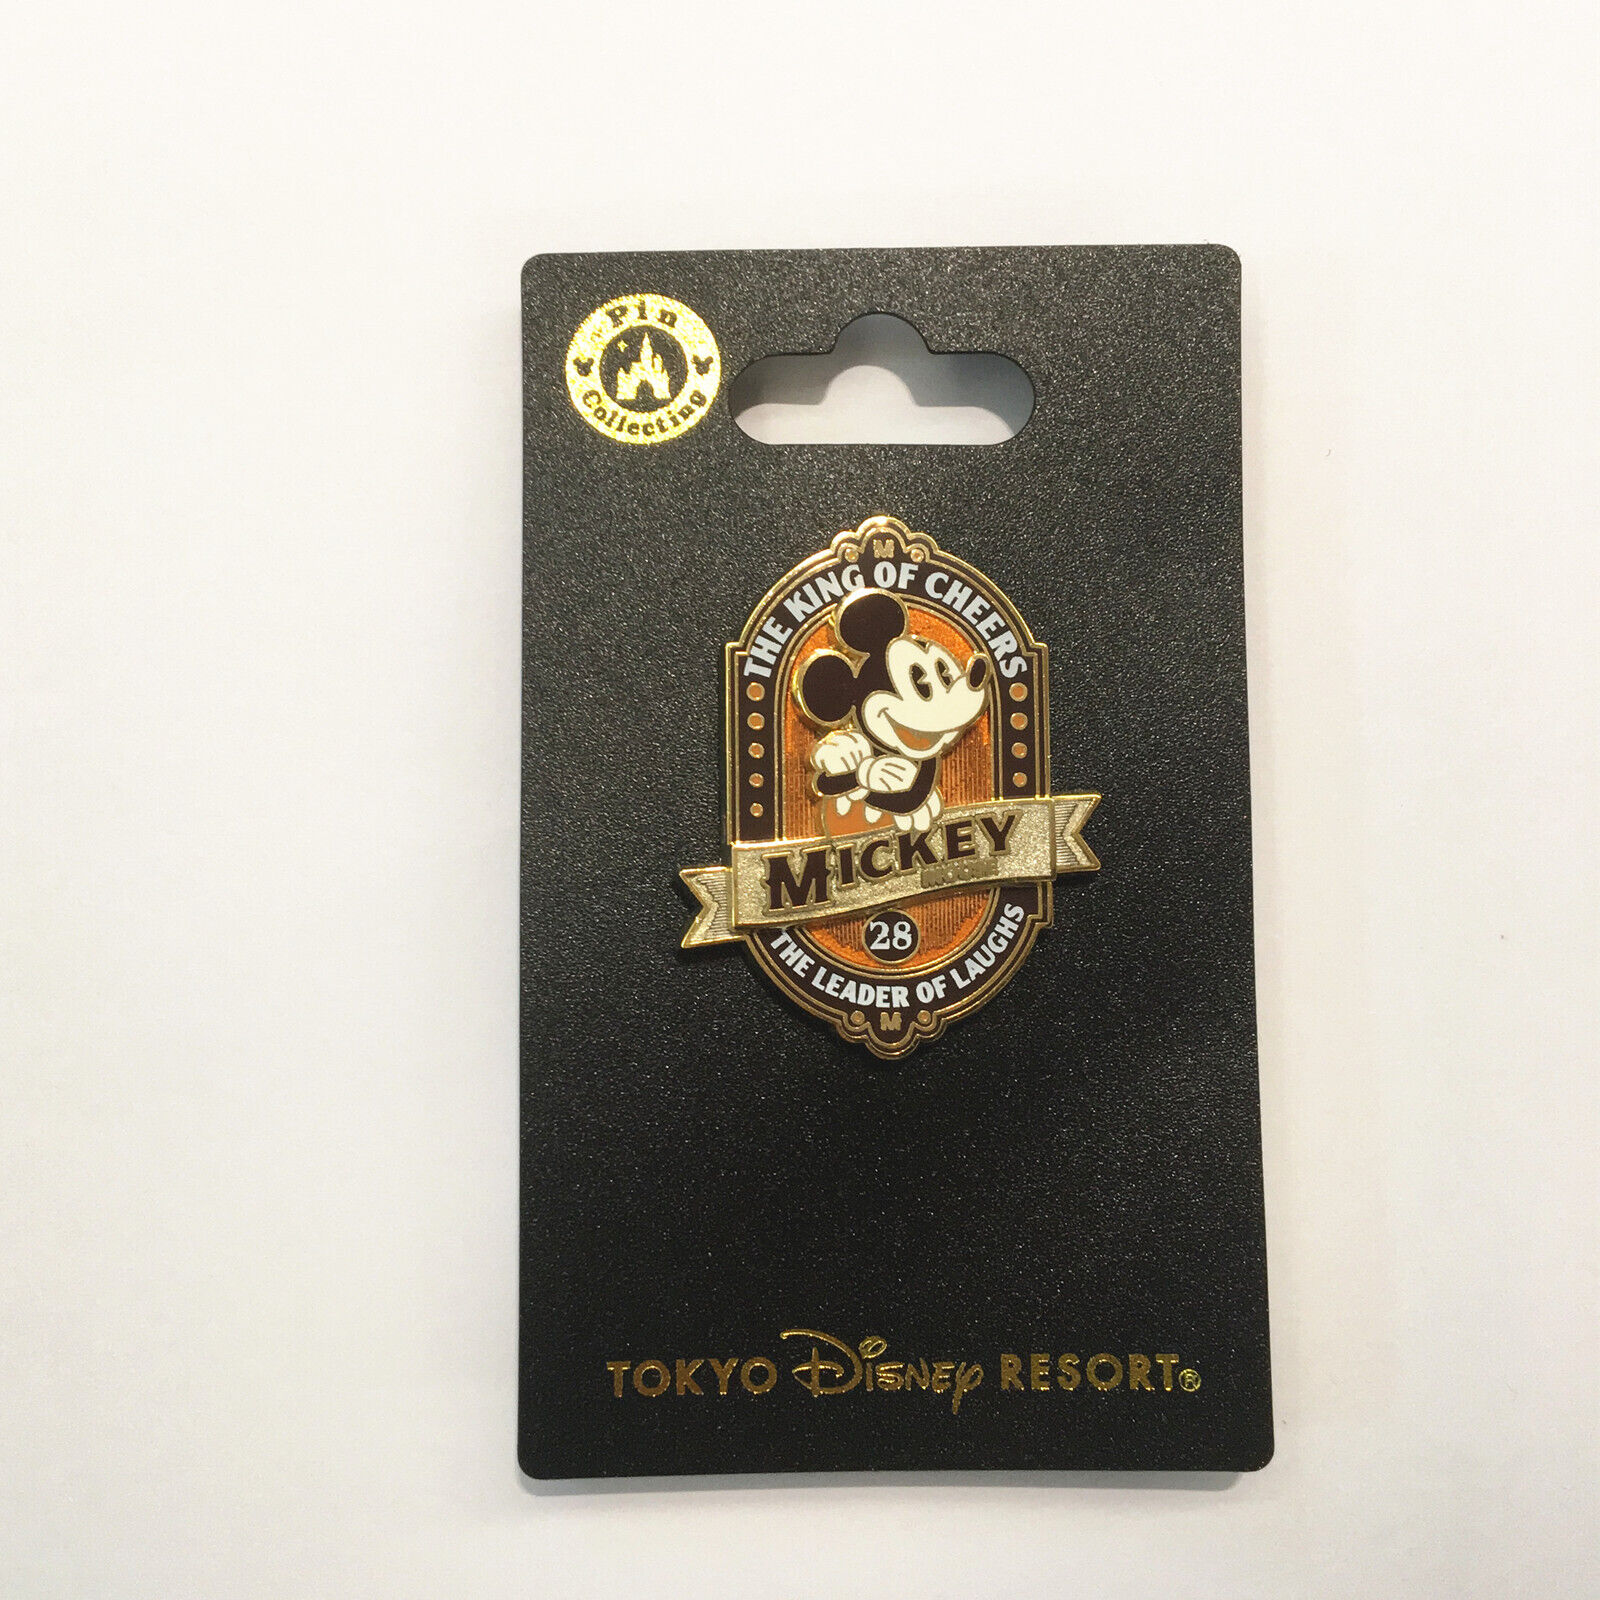 Disney Pins Tokyo The King Of Cheers Mickey 28 Anniversary new on Card